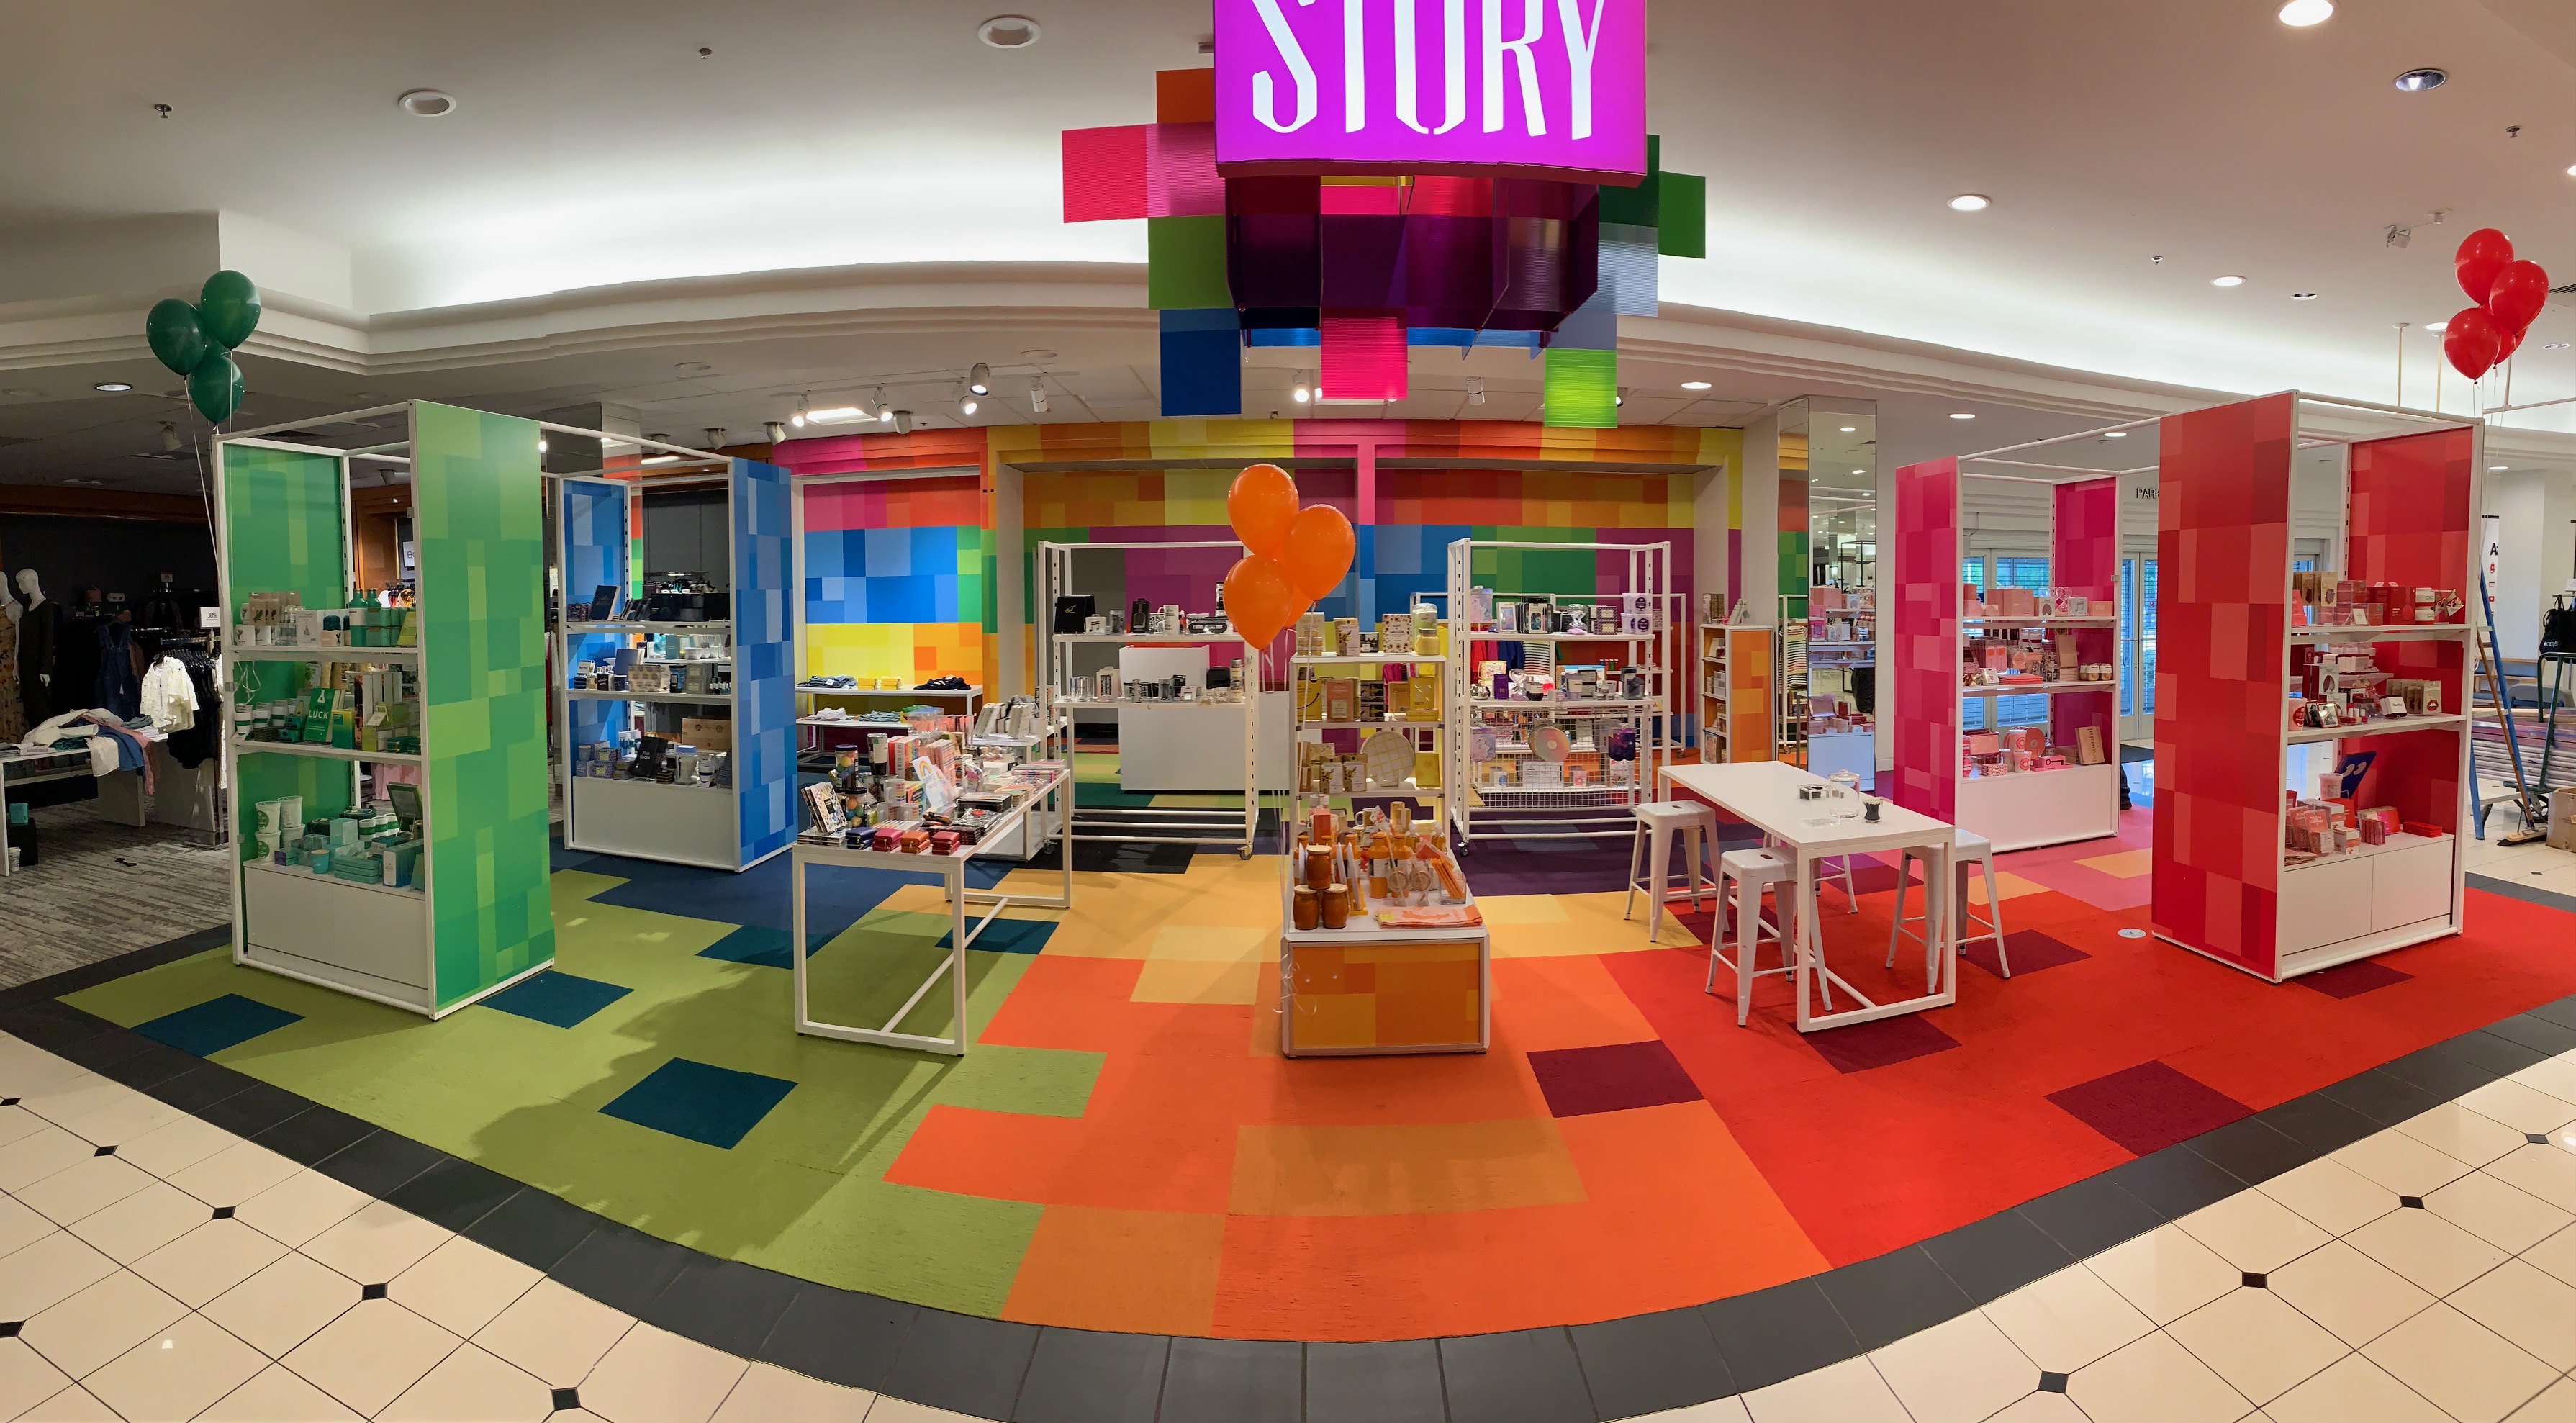 Retail therapy: Macy's Story shop comes to NorthPark, Office Depot wants to  charge you rent